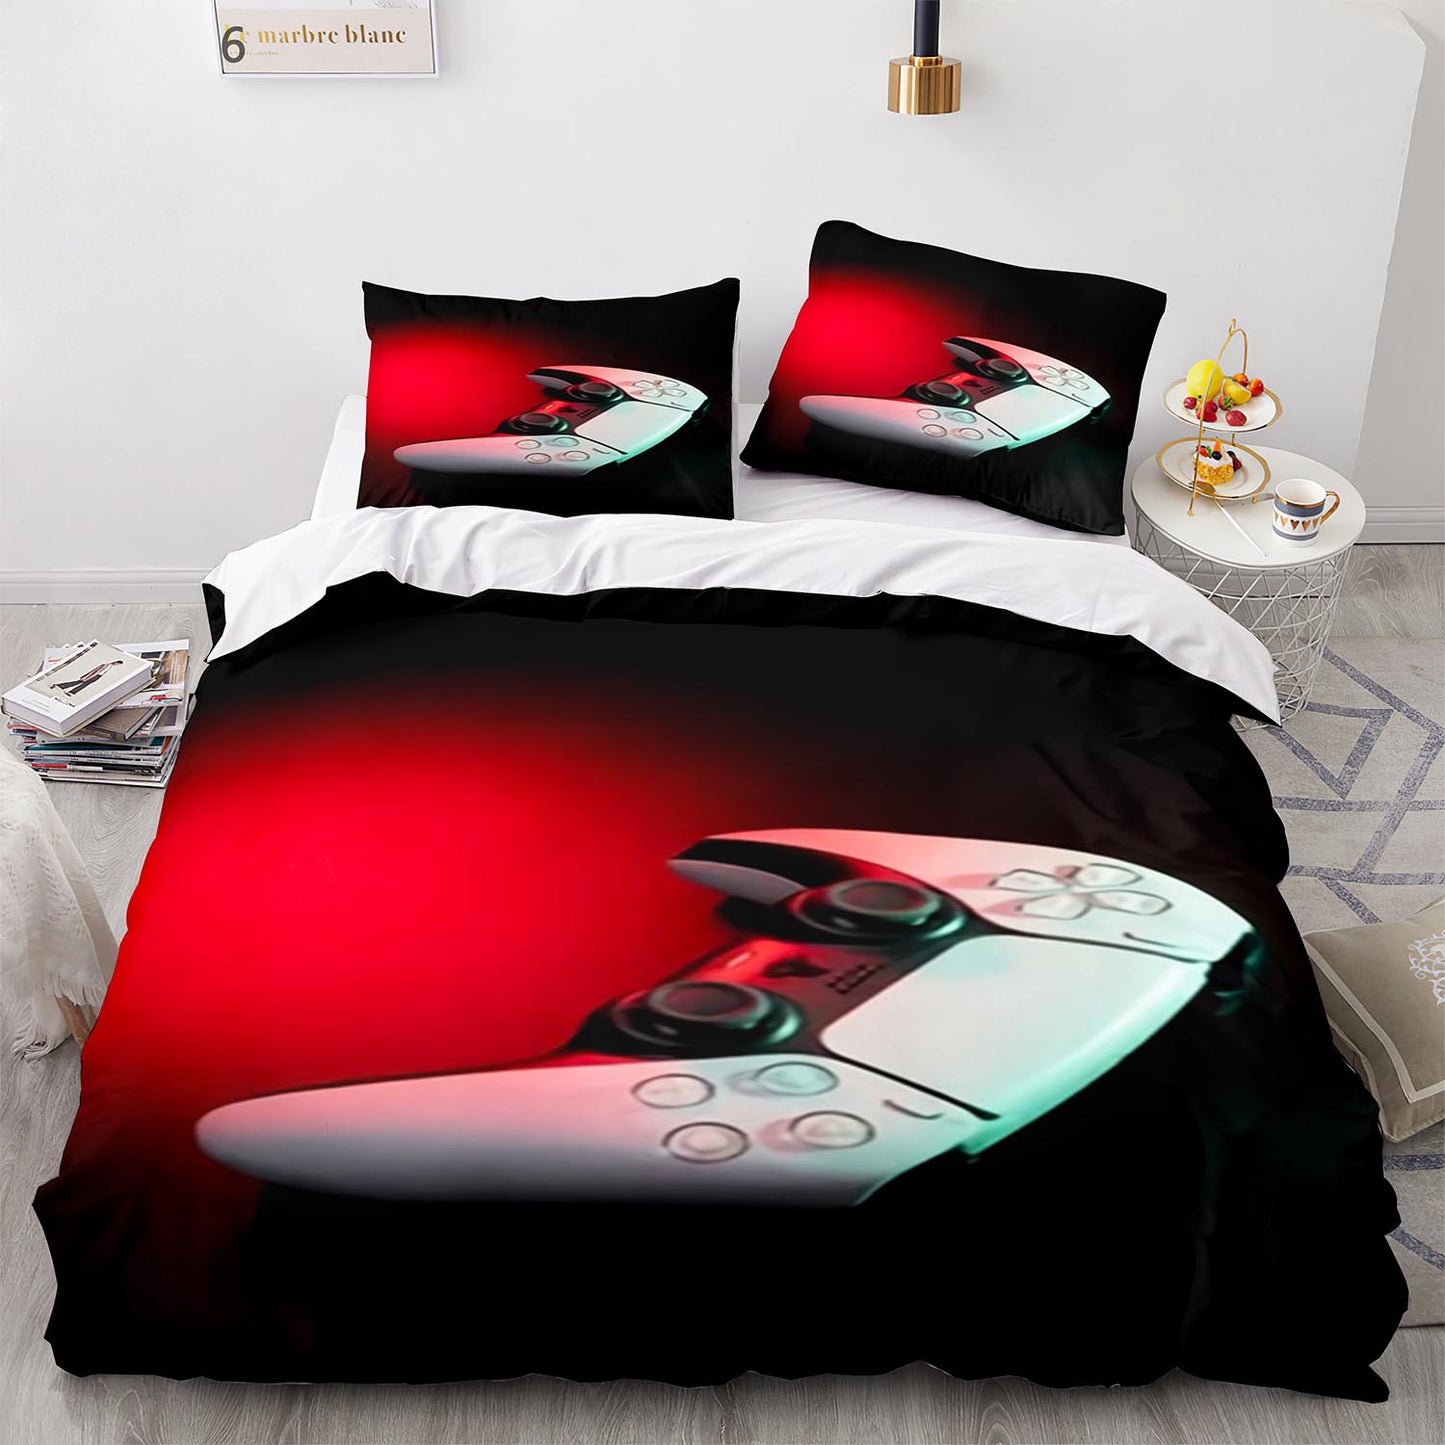 Customize Photo Logo Duvet Cover Boys Girls Adults Gift Custom Made DIY Bedding Set Designer Bed Set Queen Size Quilt Cover  PS1009